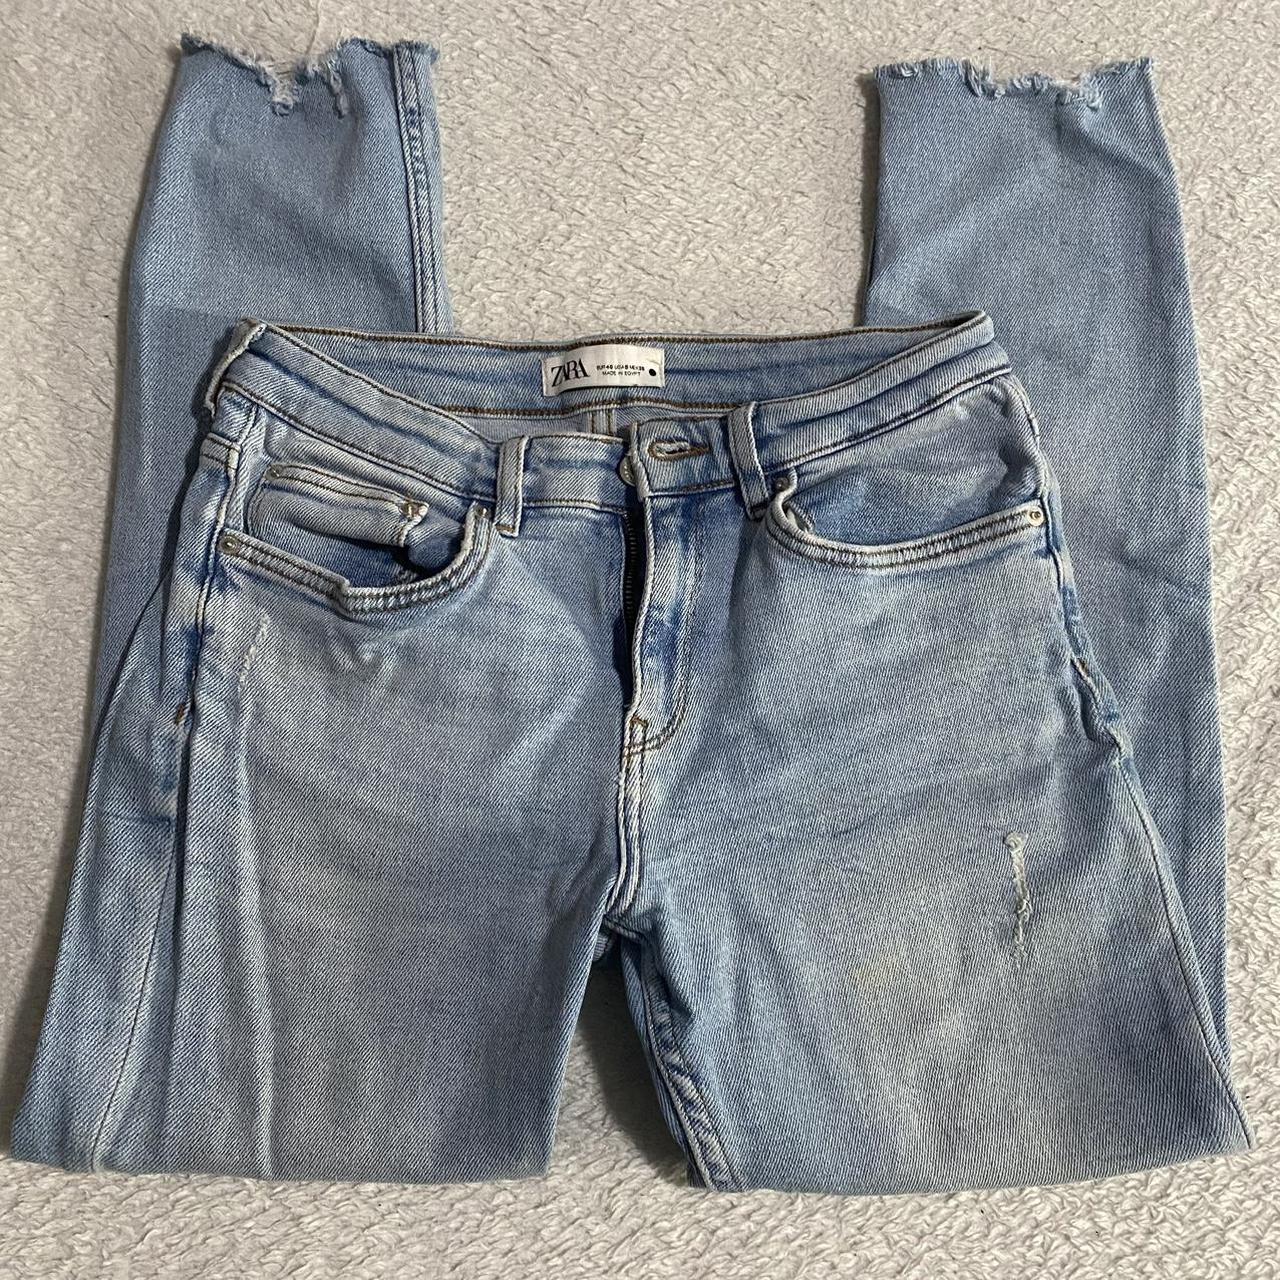 Excellent Used Condition RN 54023 Distressing is - Depop